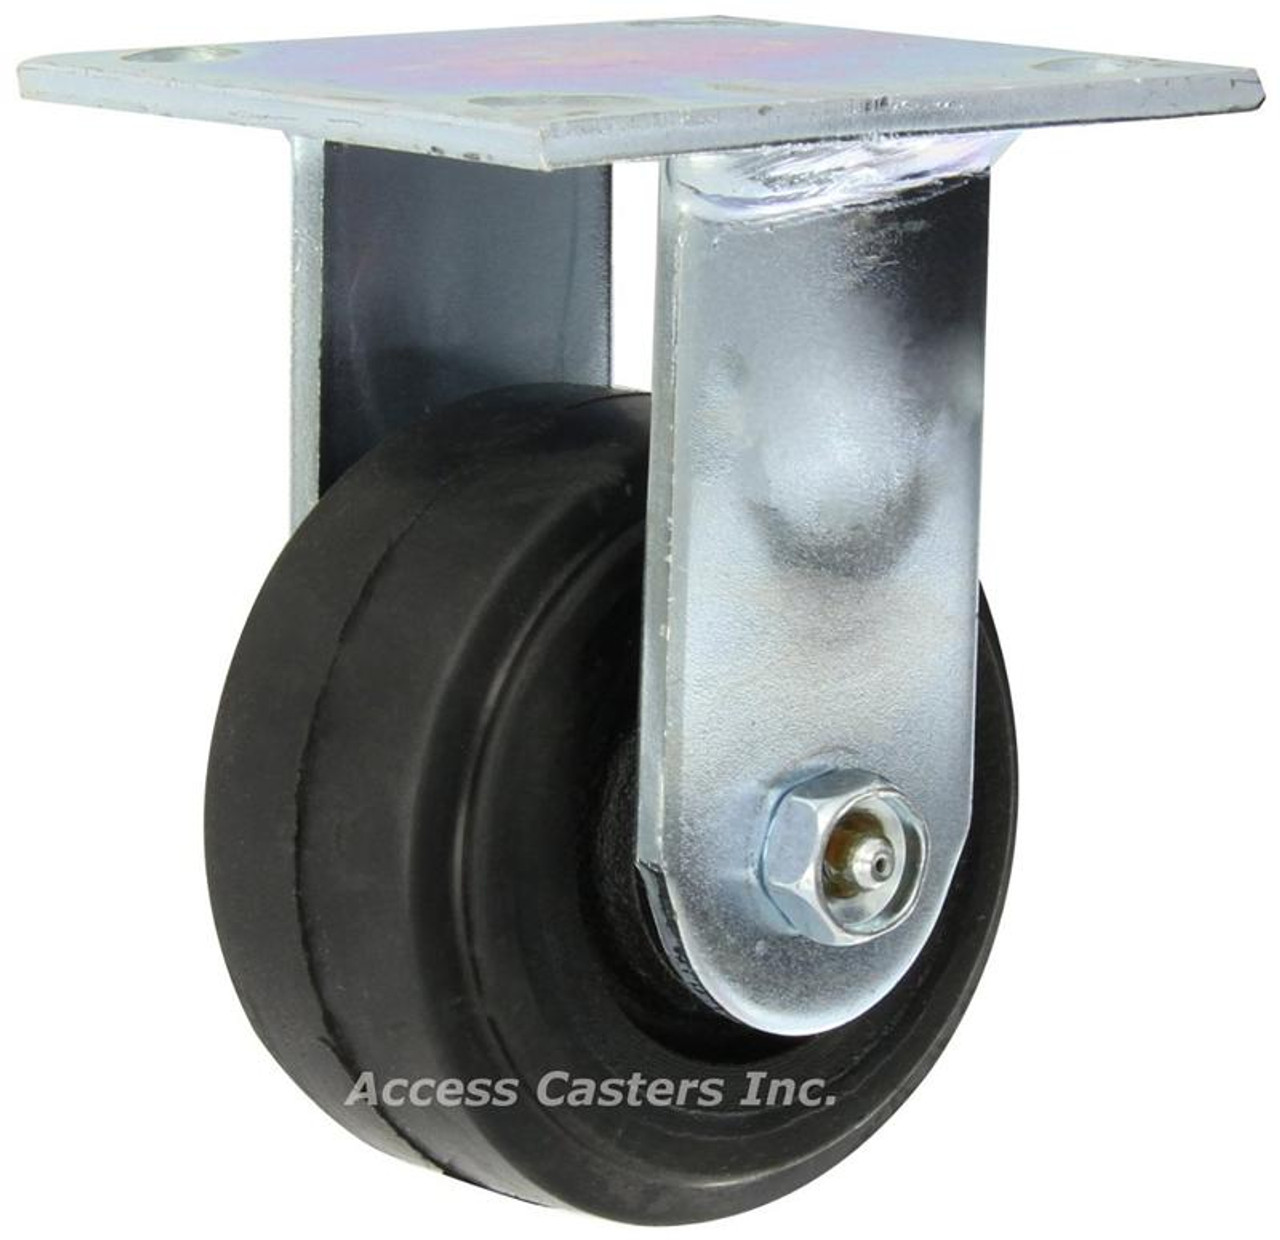 16MR04201R 4" x 2" Albion 16 Series Rigid Plate Caster, mold on rubber wheel